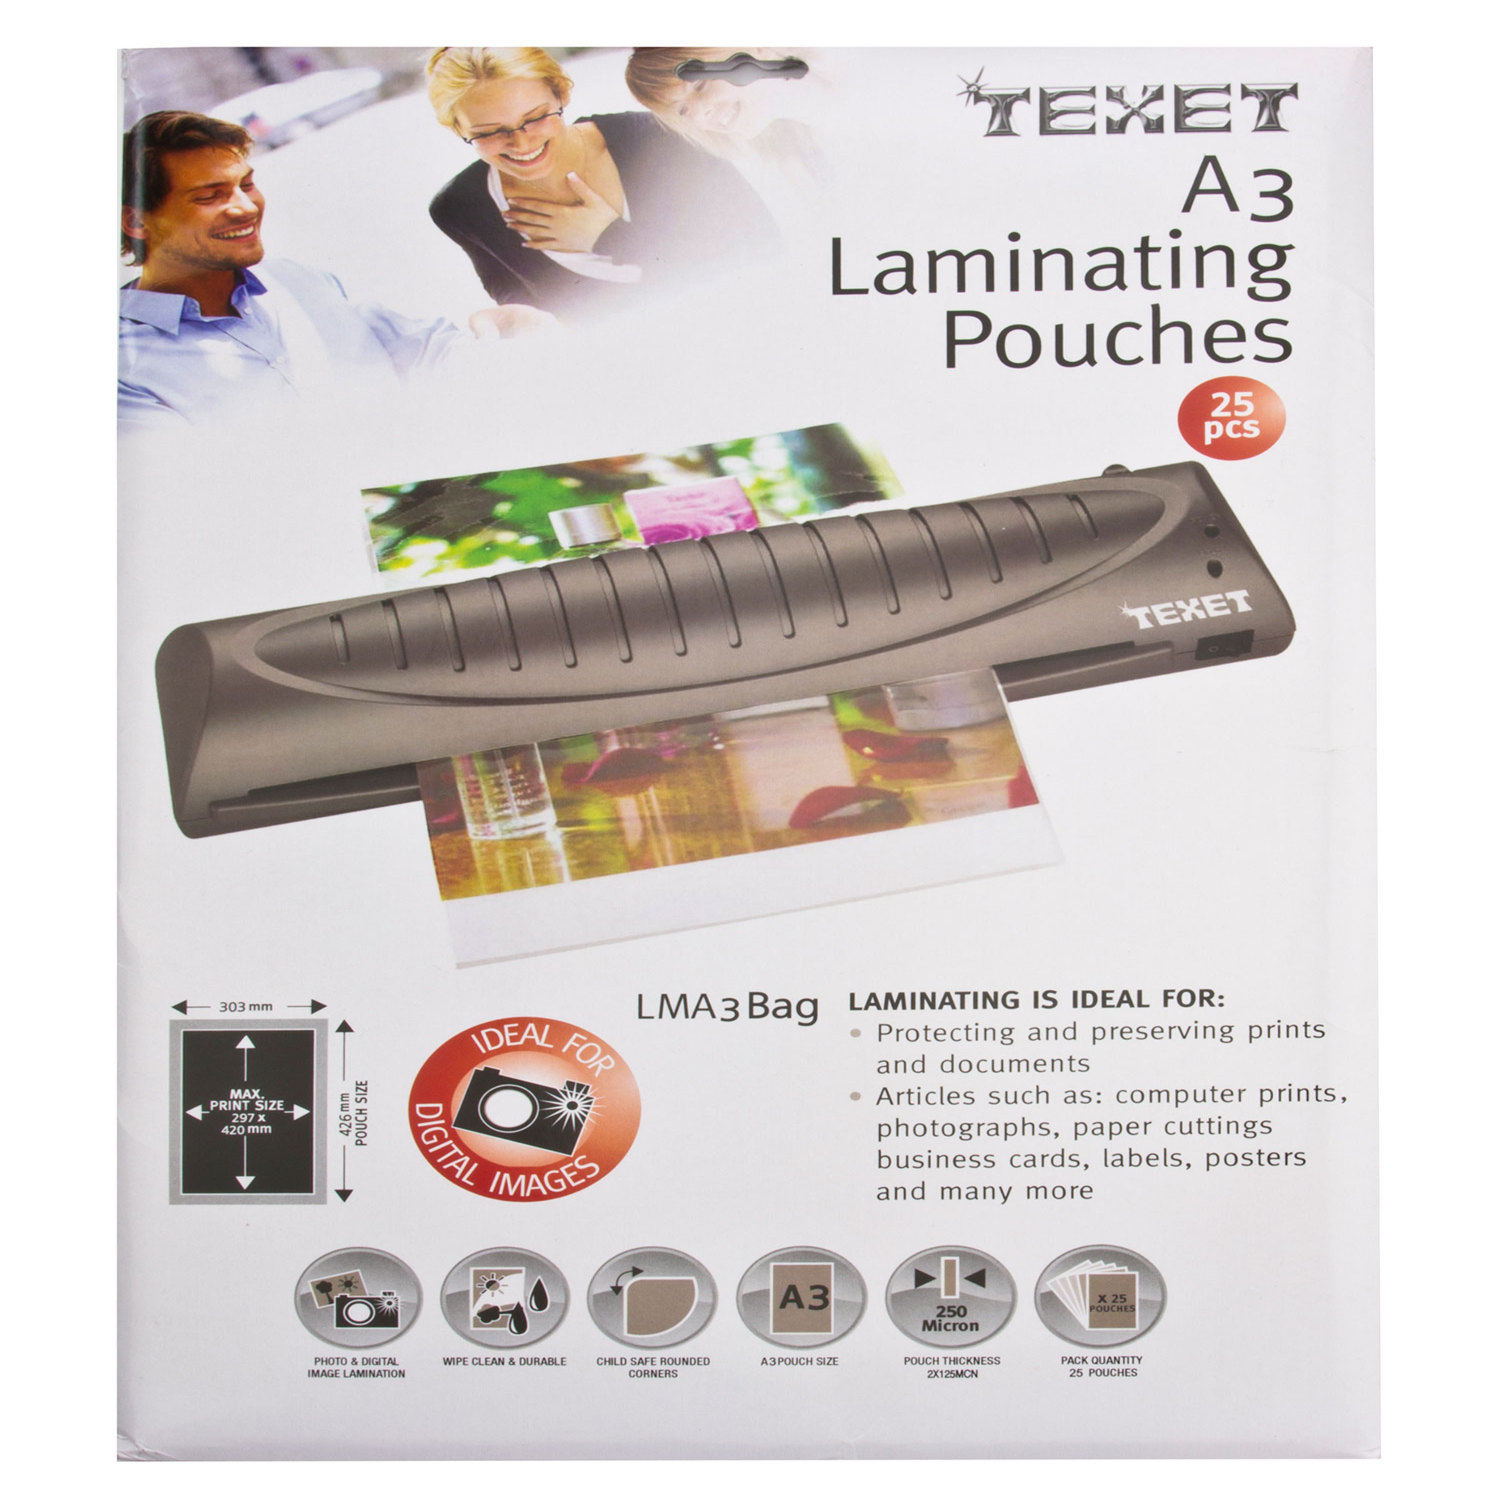 Texet A3 Laminating Pouches Image 1